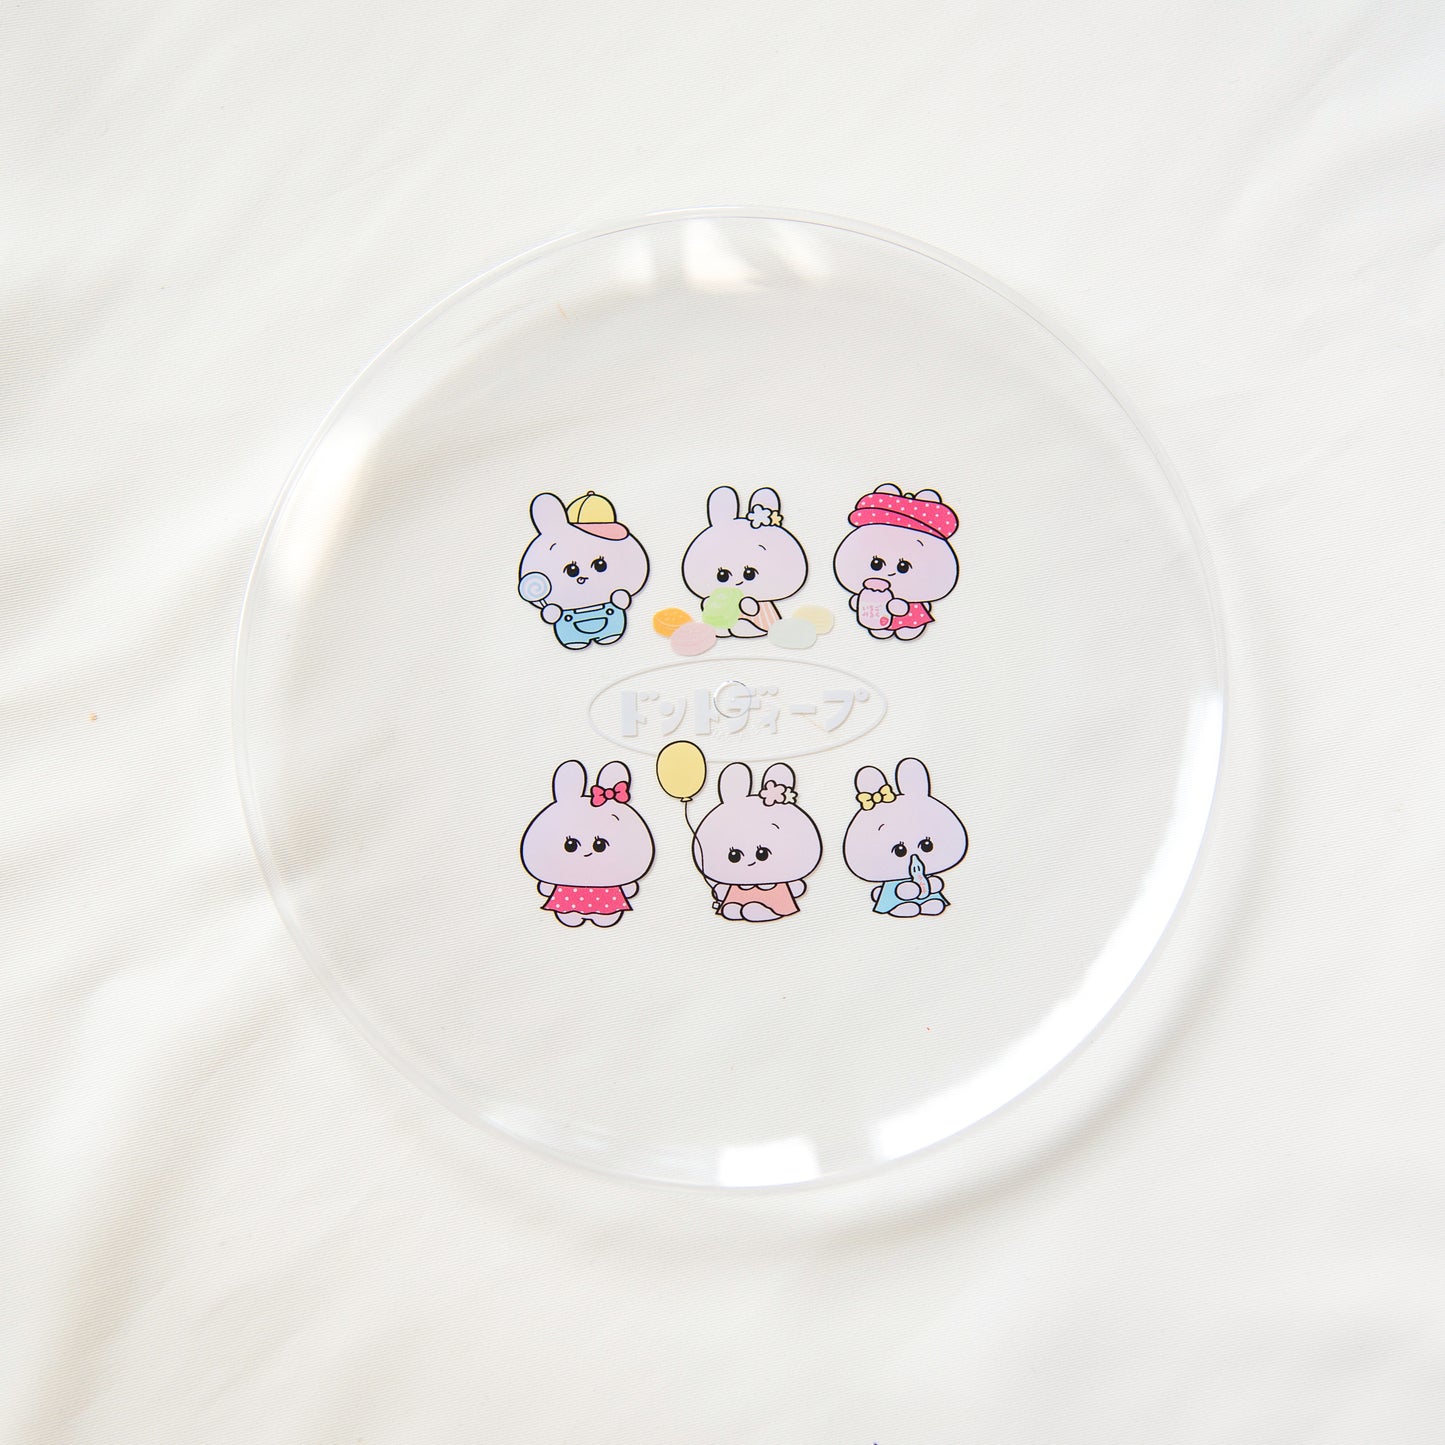 [Asamimi-chan] Clear plate (retro) [shipped in mid-November]